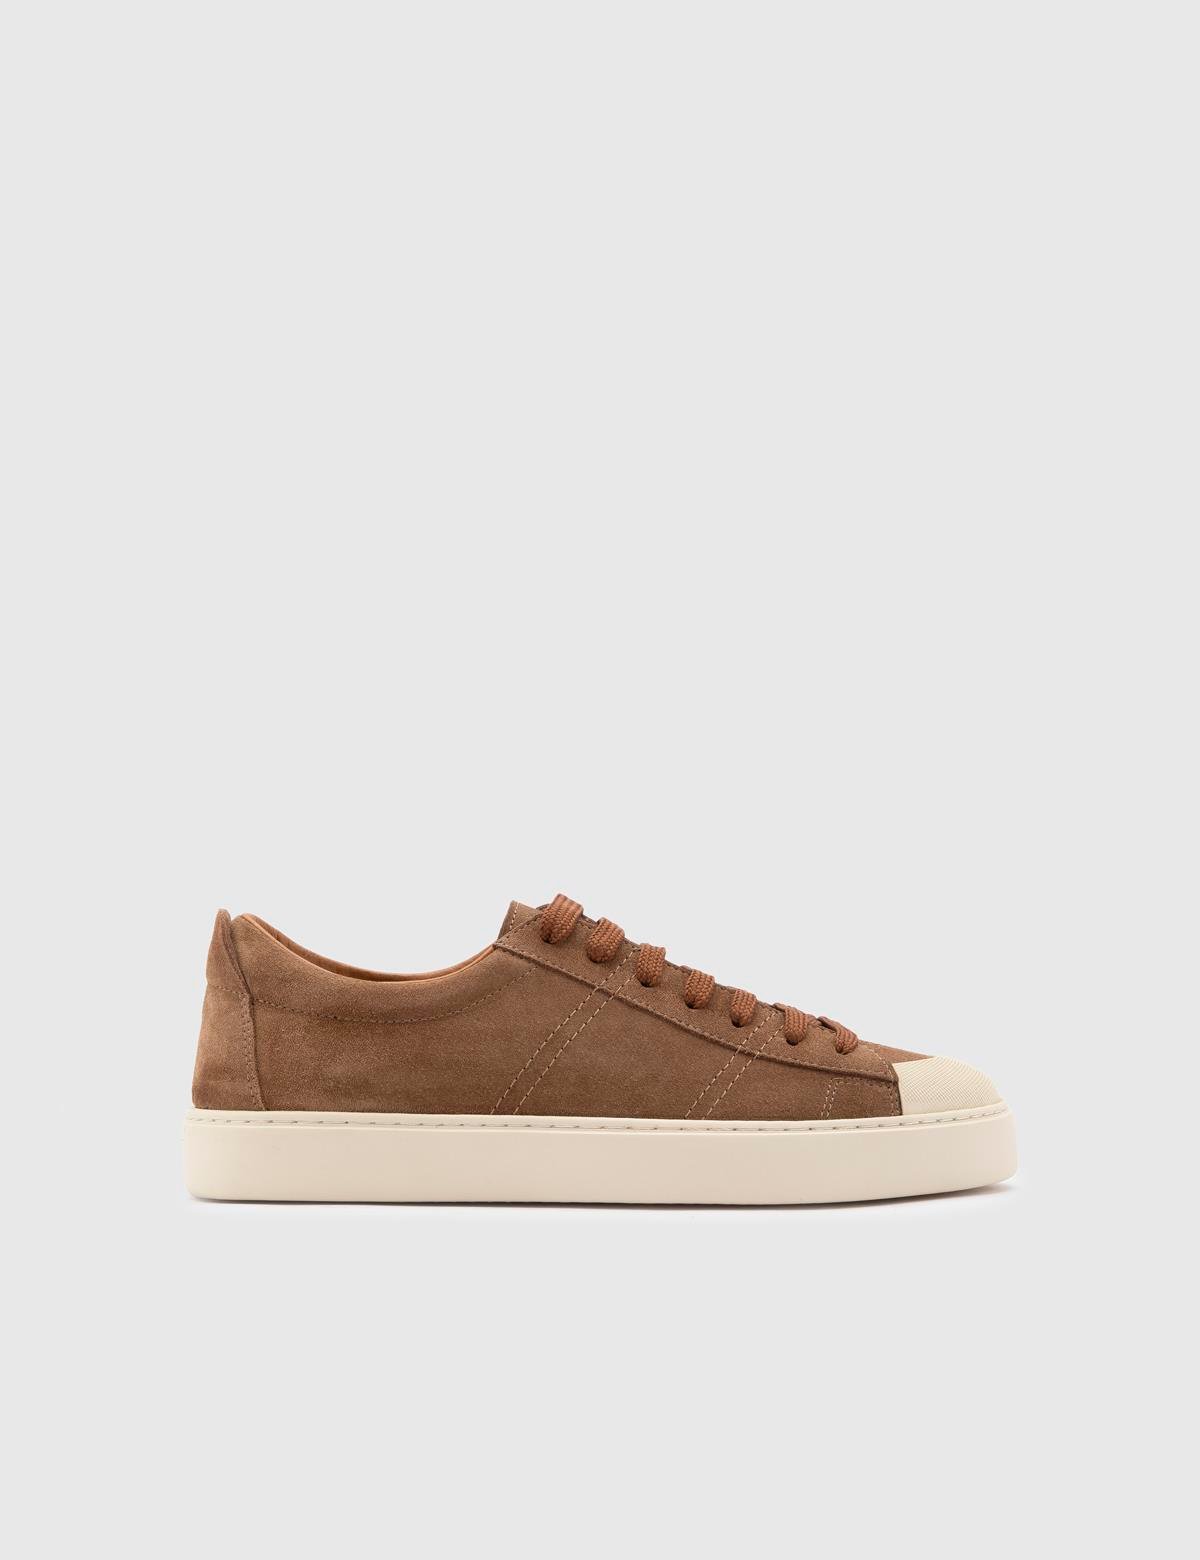 Augusto Saddle Brown Suede Leather Men's Sneaker